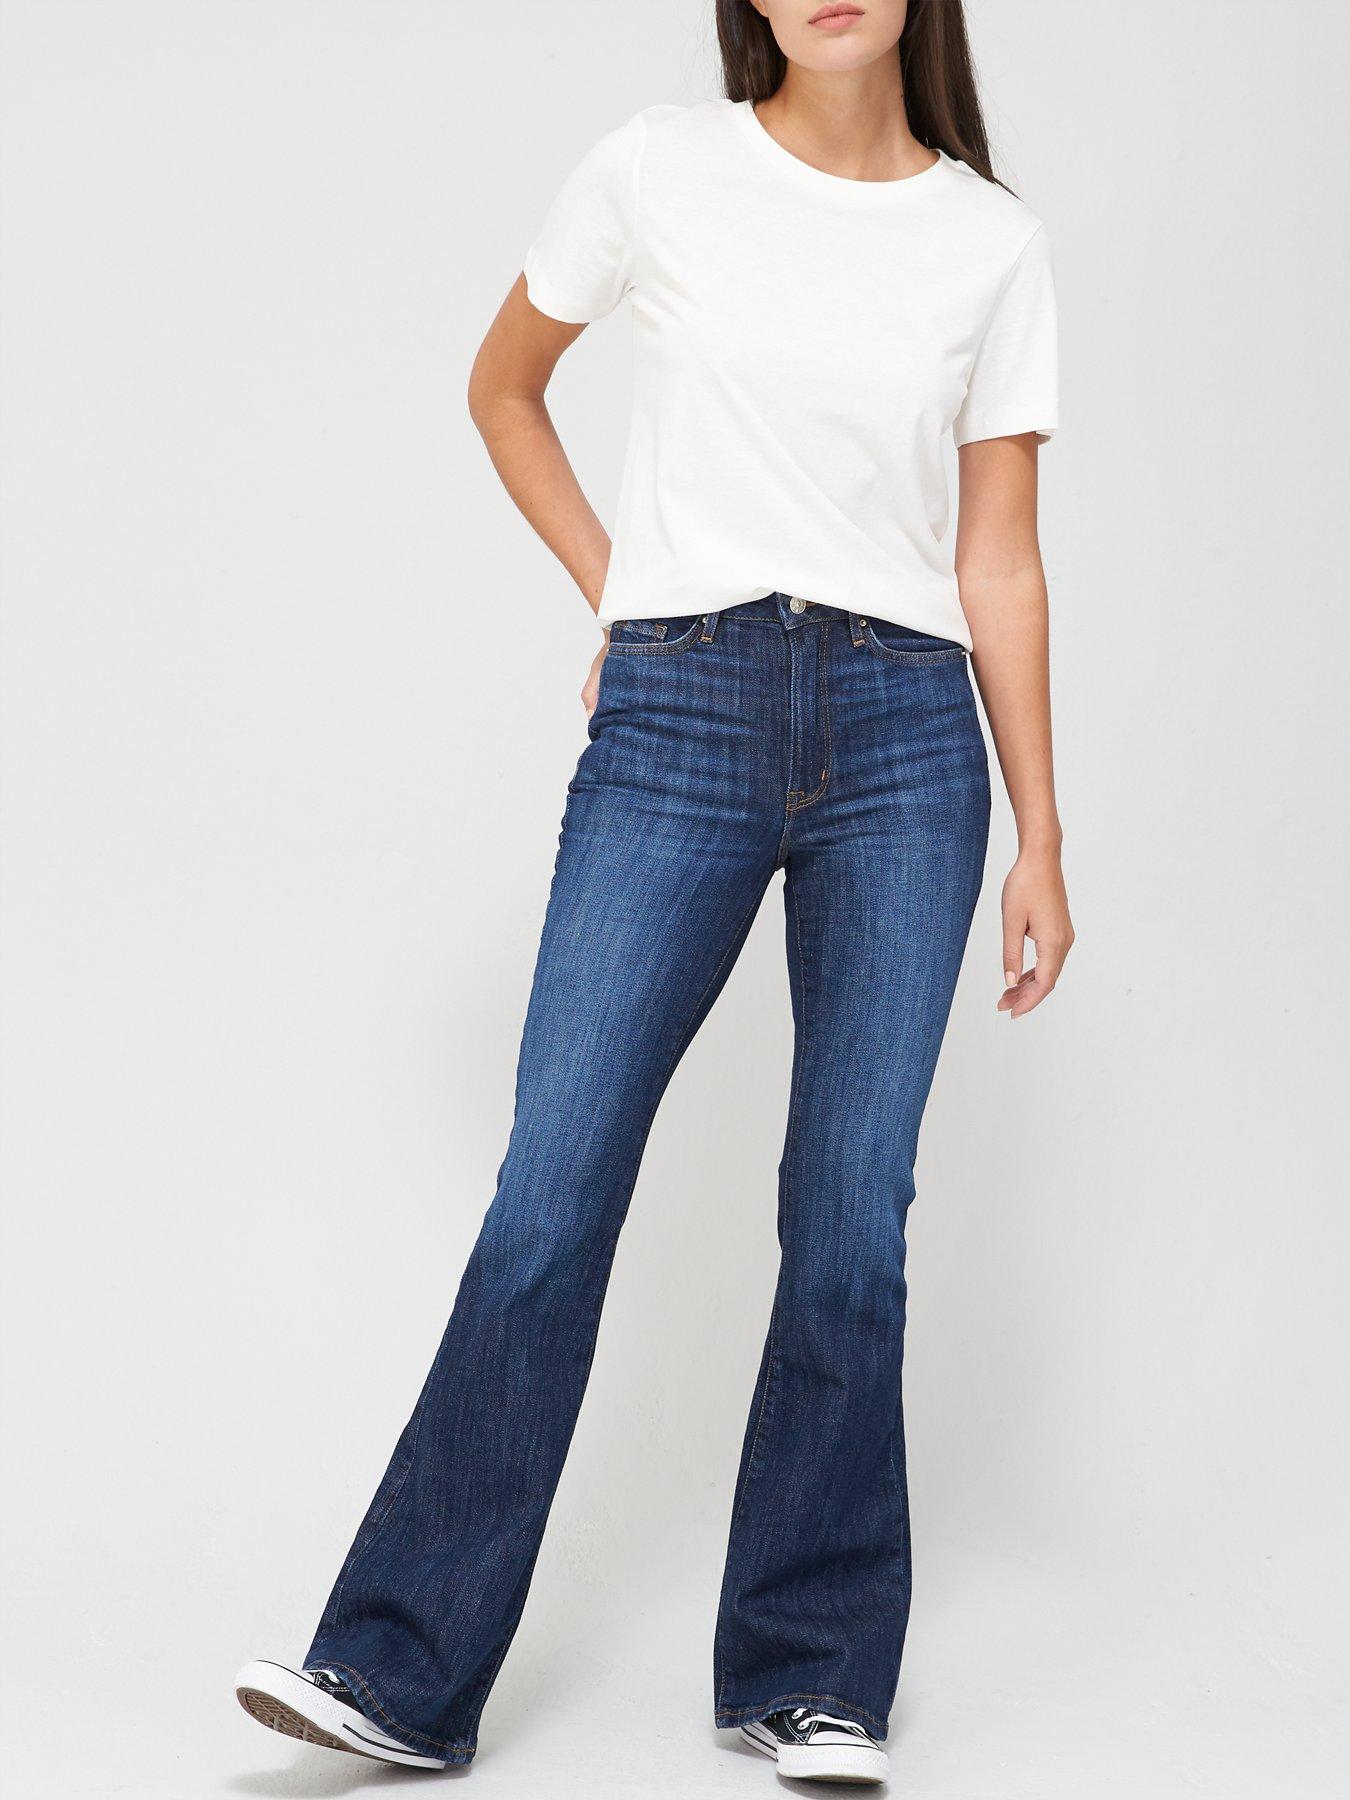 V by Very Forever Flare Jeans - Dark Wash